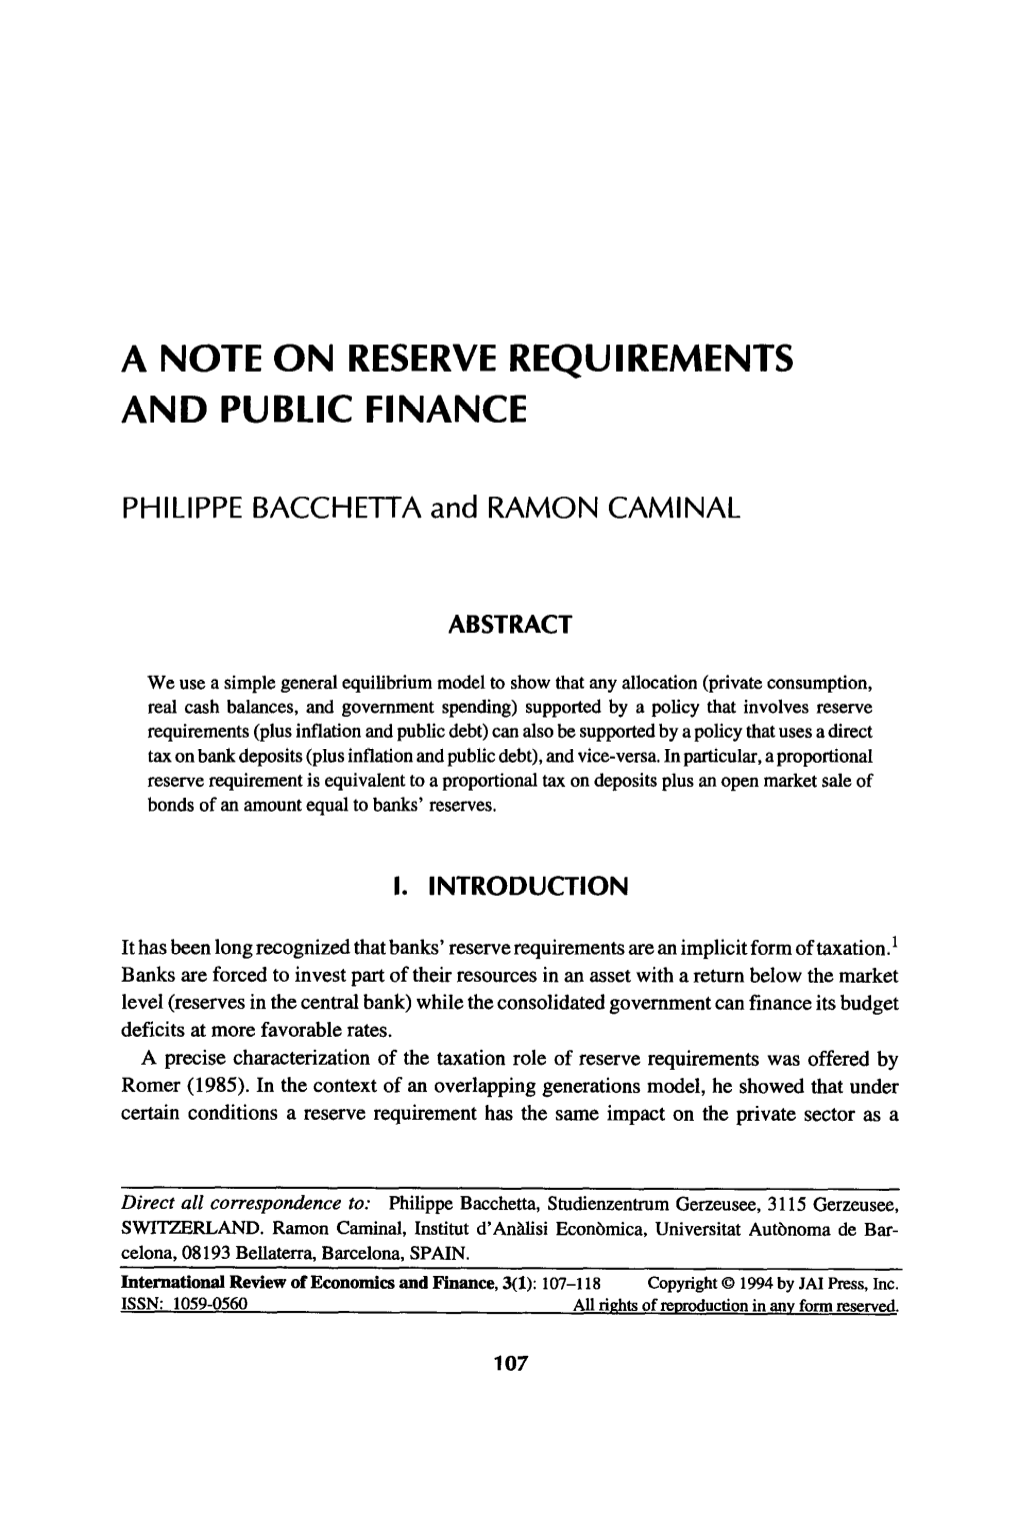 A Note on Reserve Requirements and Public Finance